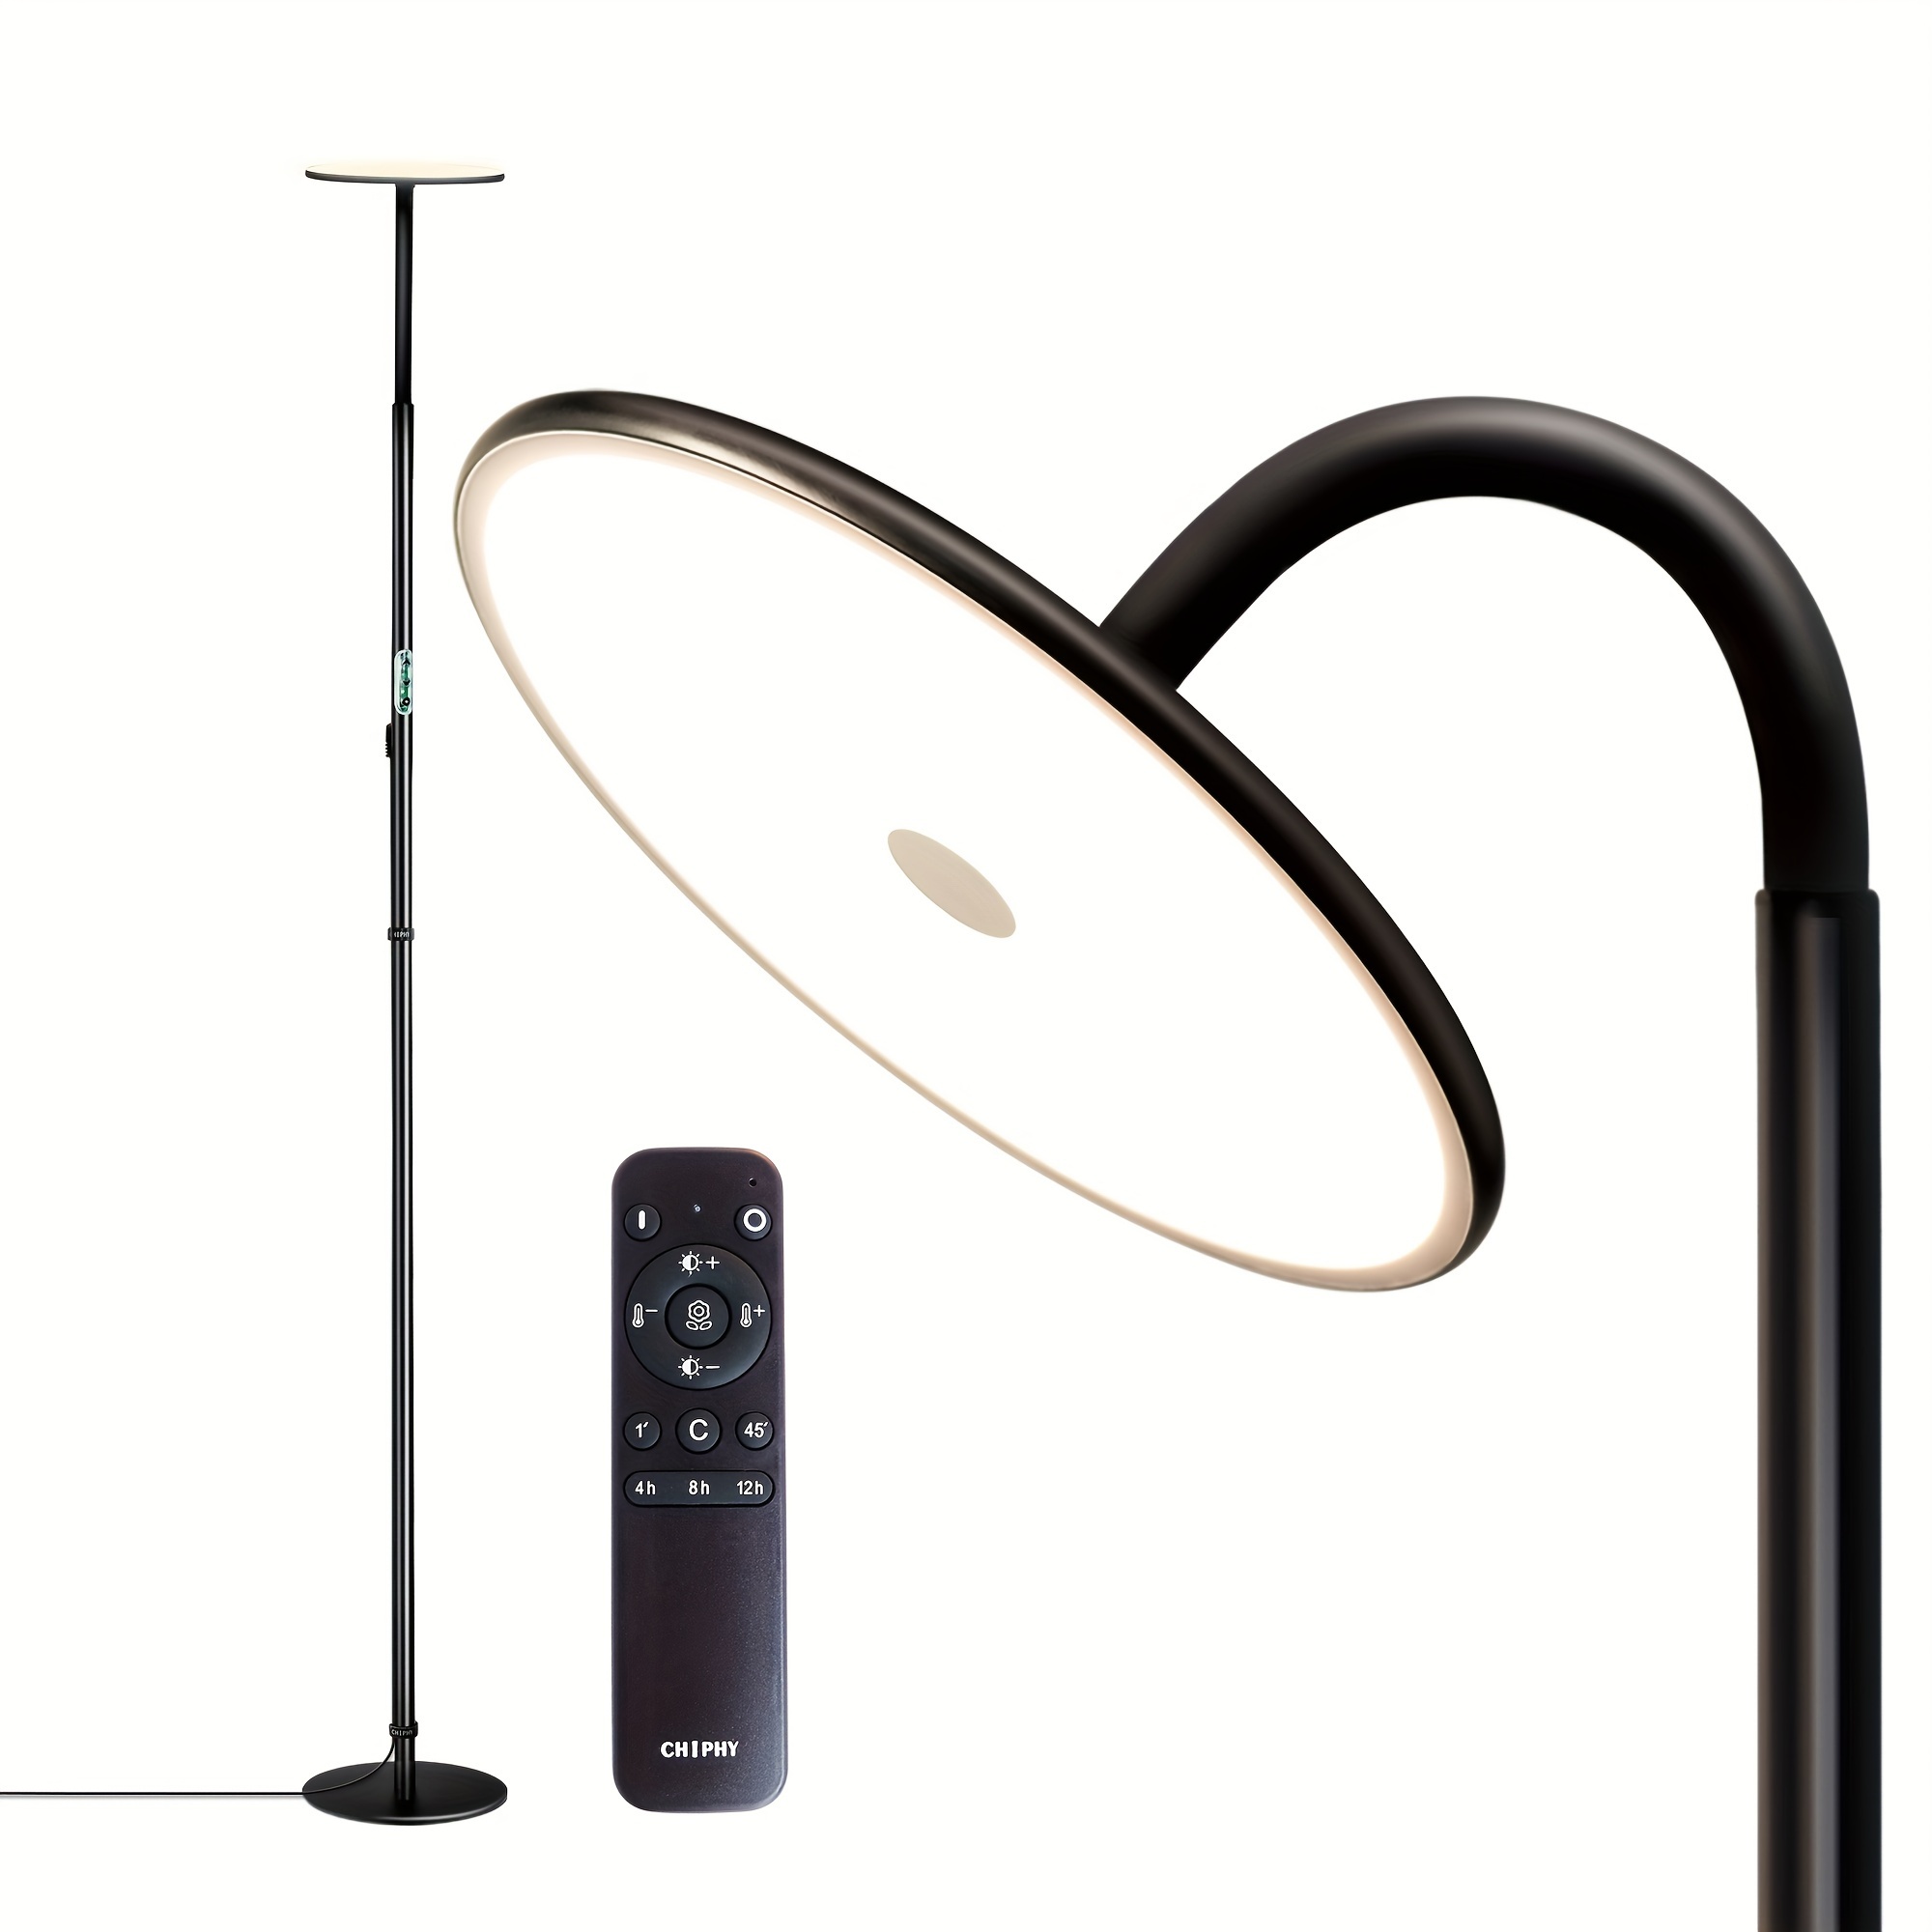 

1pc Floor Lamp, 76 Inches High, 40w/3500lm 2300k-6500k 3000lux Full Spectrum Super Bright Floor Lamp, Dimmable Adjustable Gooseneck With Remote Control For Bedroom Reading Office